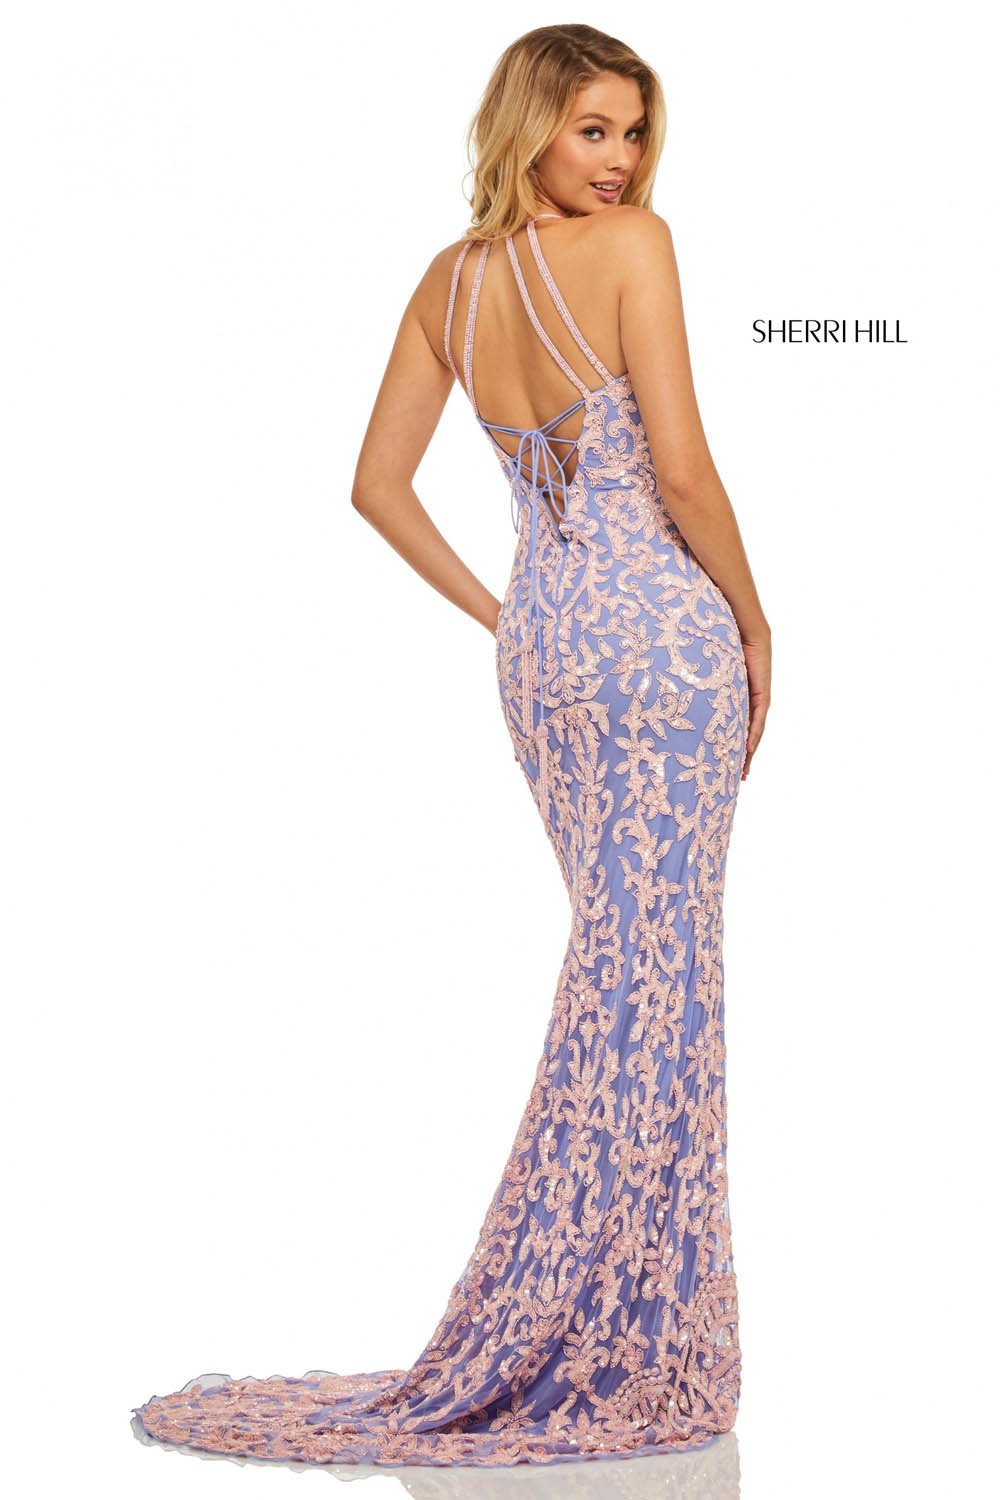 Sherri Hill 52527 dress images in these colors: Nude Aqua, Light Gold, Periwinkle Pink, Nude Coral, Nude Ivory, Black, Burgundy.